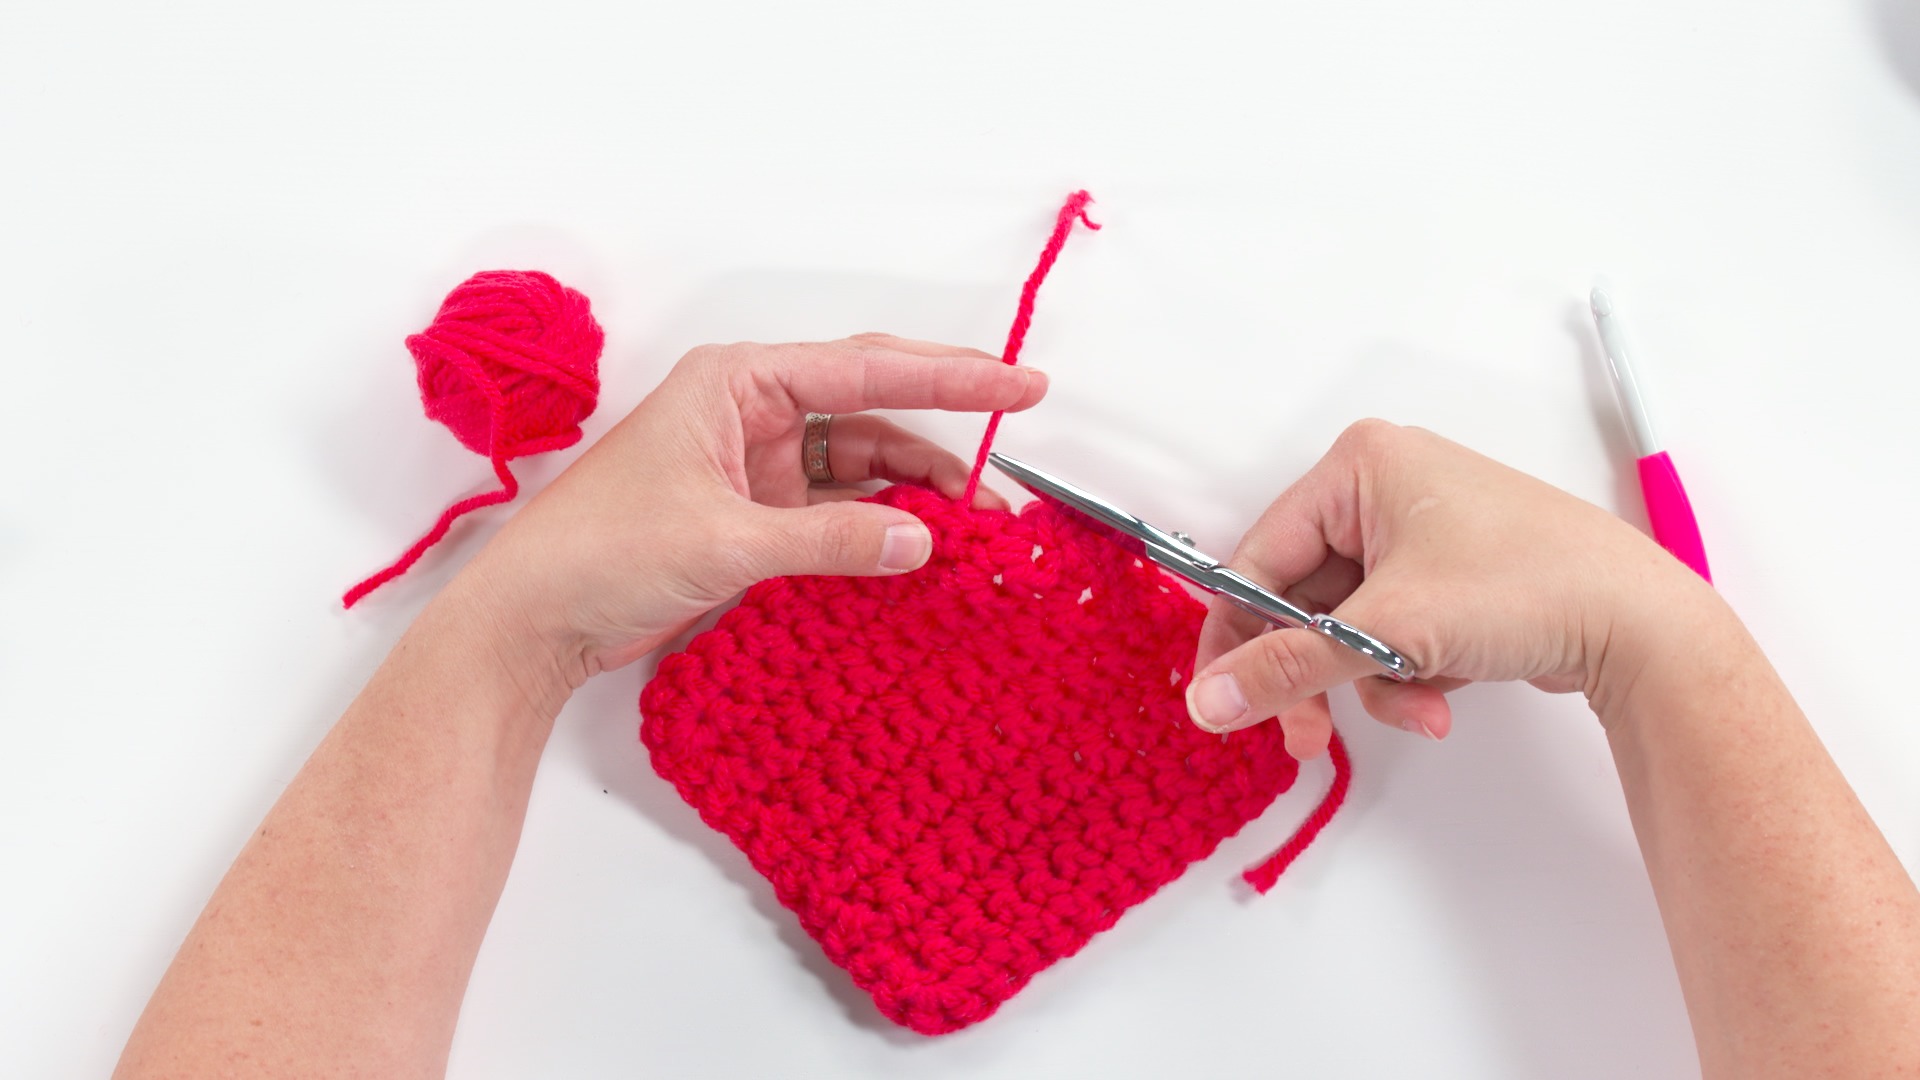 14-Day Learn to Crochet Series: Day 6